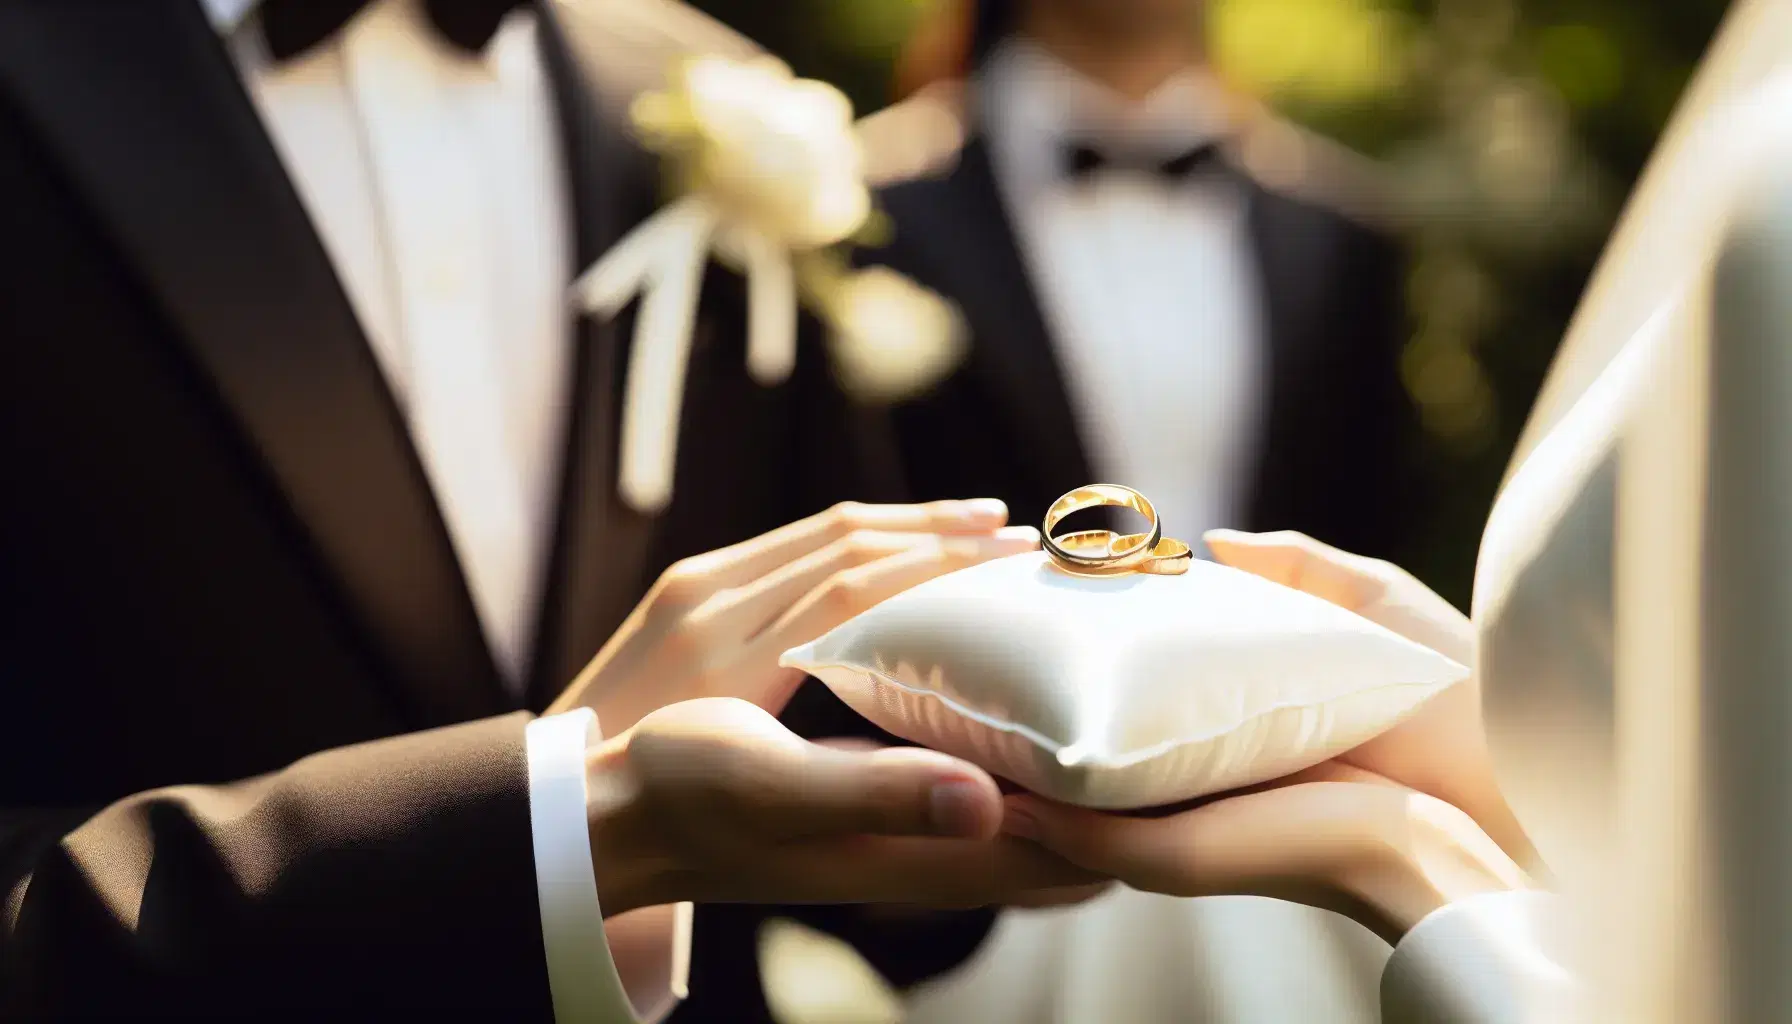 Gold wedding bands on white satin pillow with couple in formal attire exchanging rings at an outdoor ceremony, sunlight filtering through greenery.